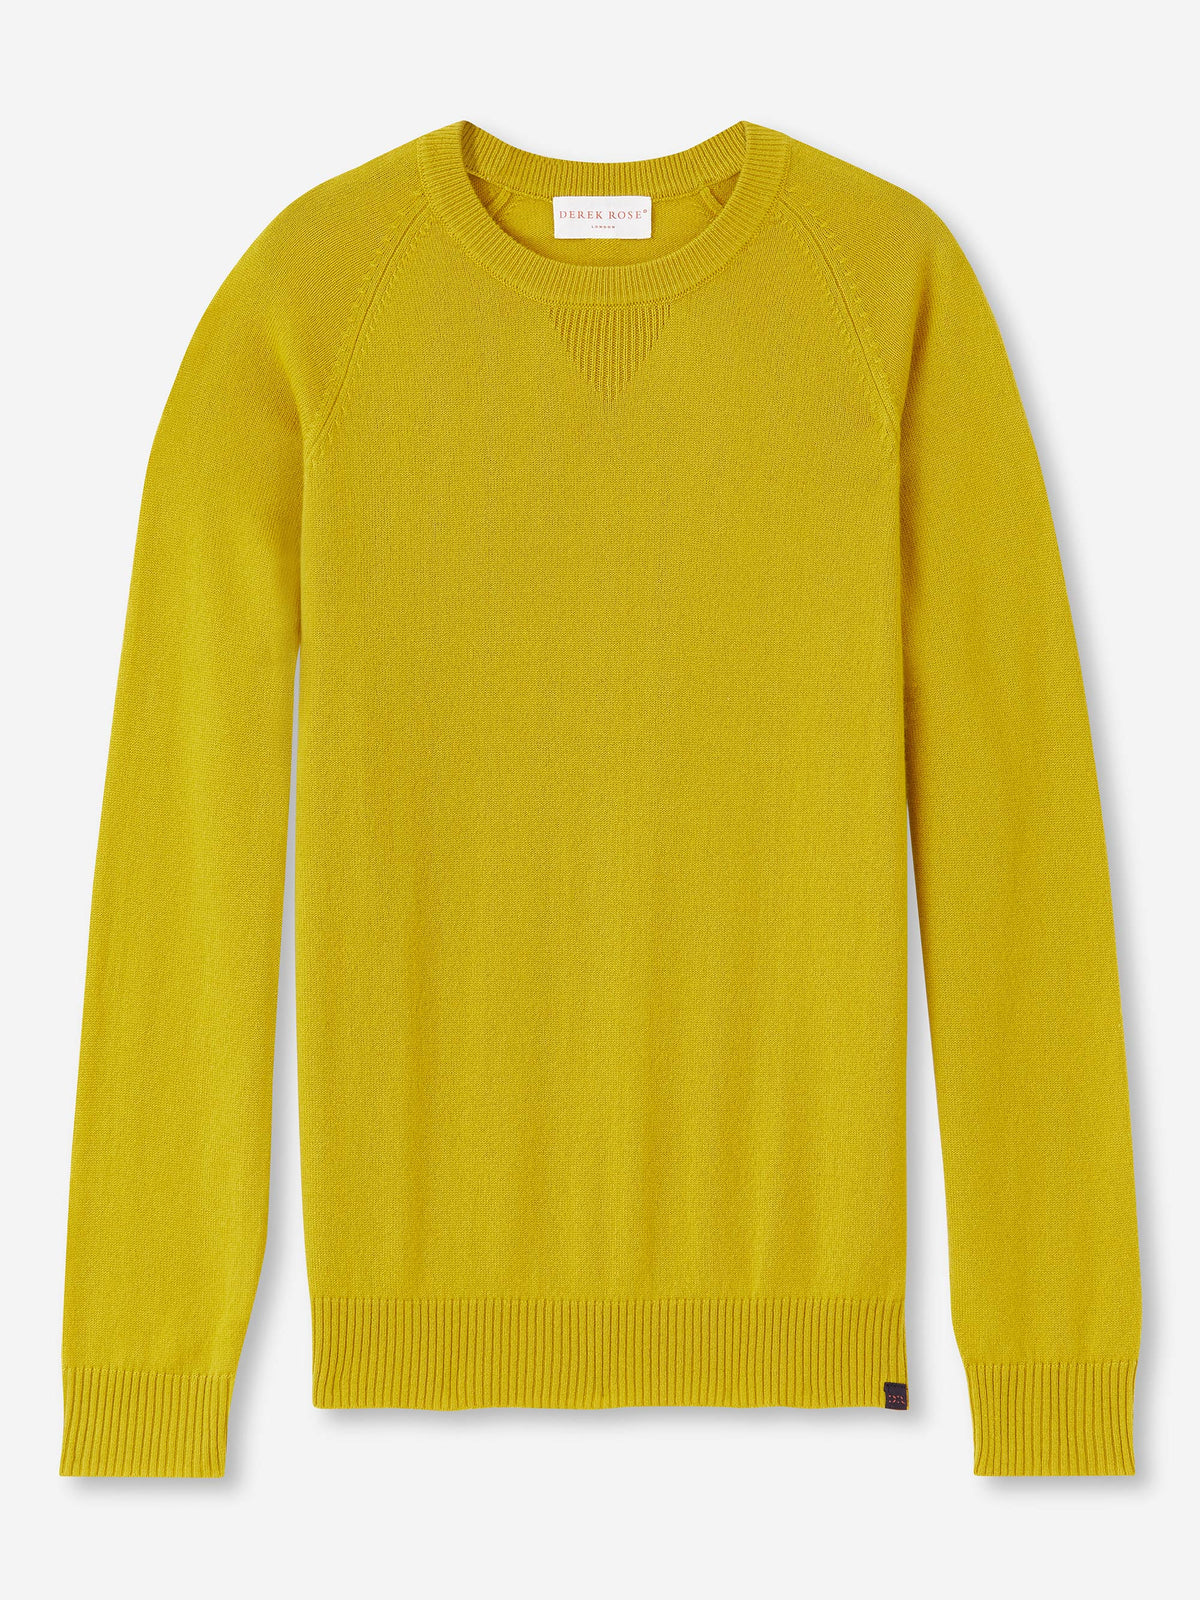 Men's Sweater Finley Cashmere Gold